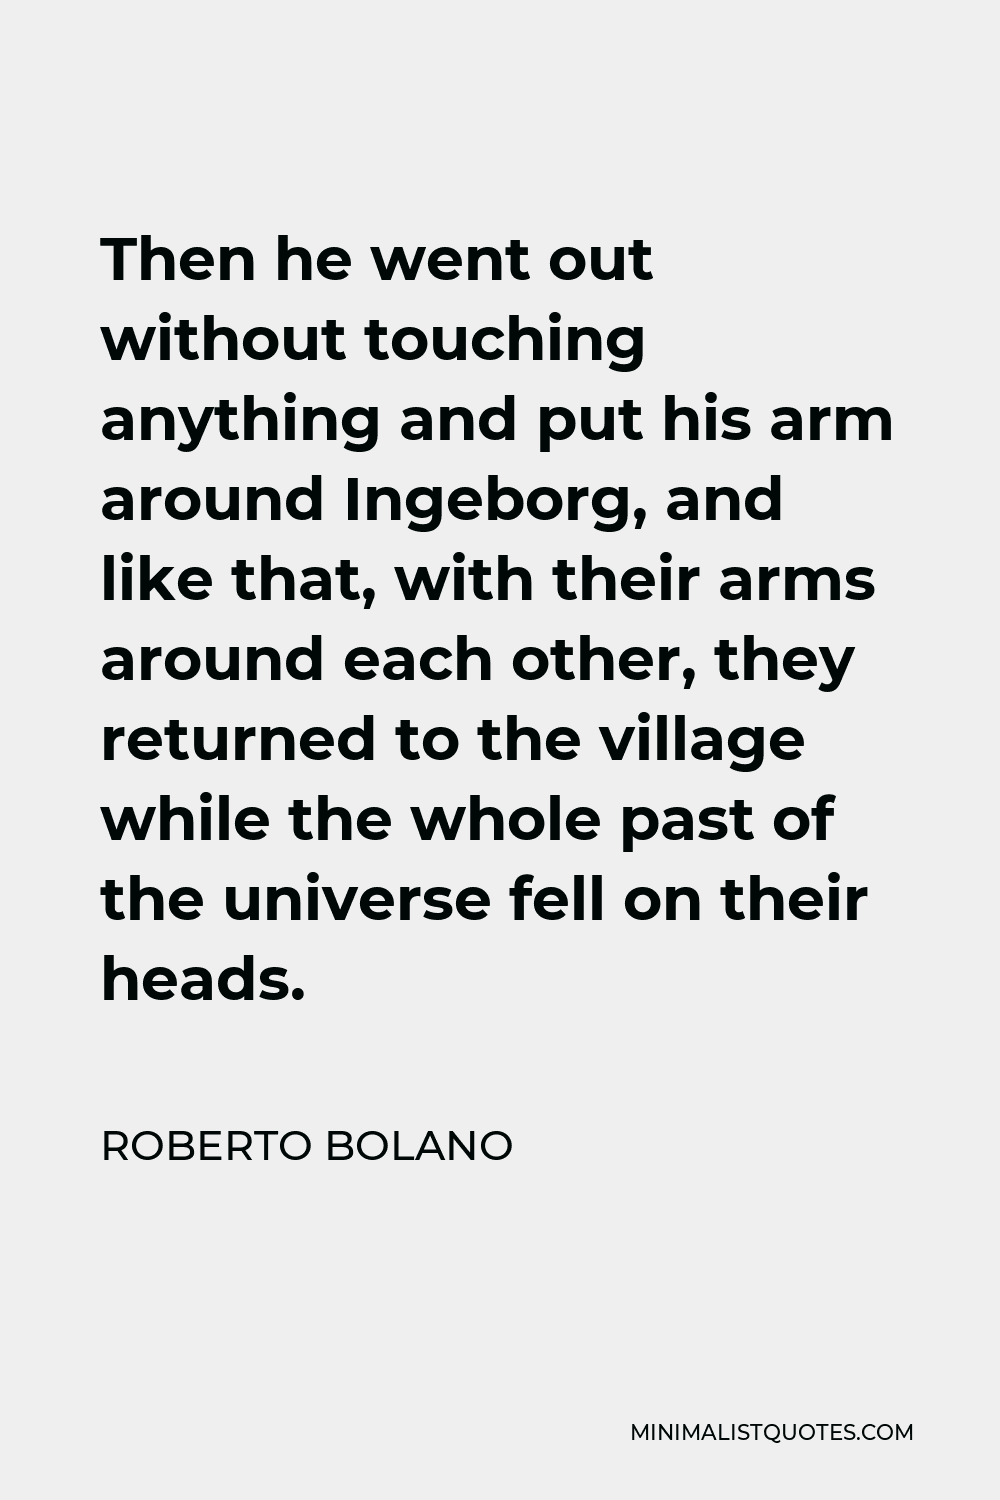 Roberto Bolano Quote - Then he went out without touching anything and put his arm around Ingeborg, and like that, with their arms around each other, they returned to the village while the whole past of the universe fell on their heads.